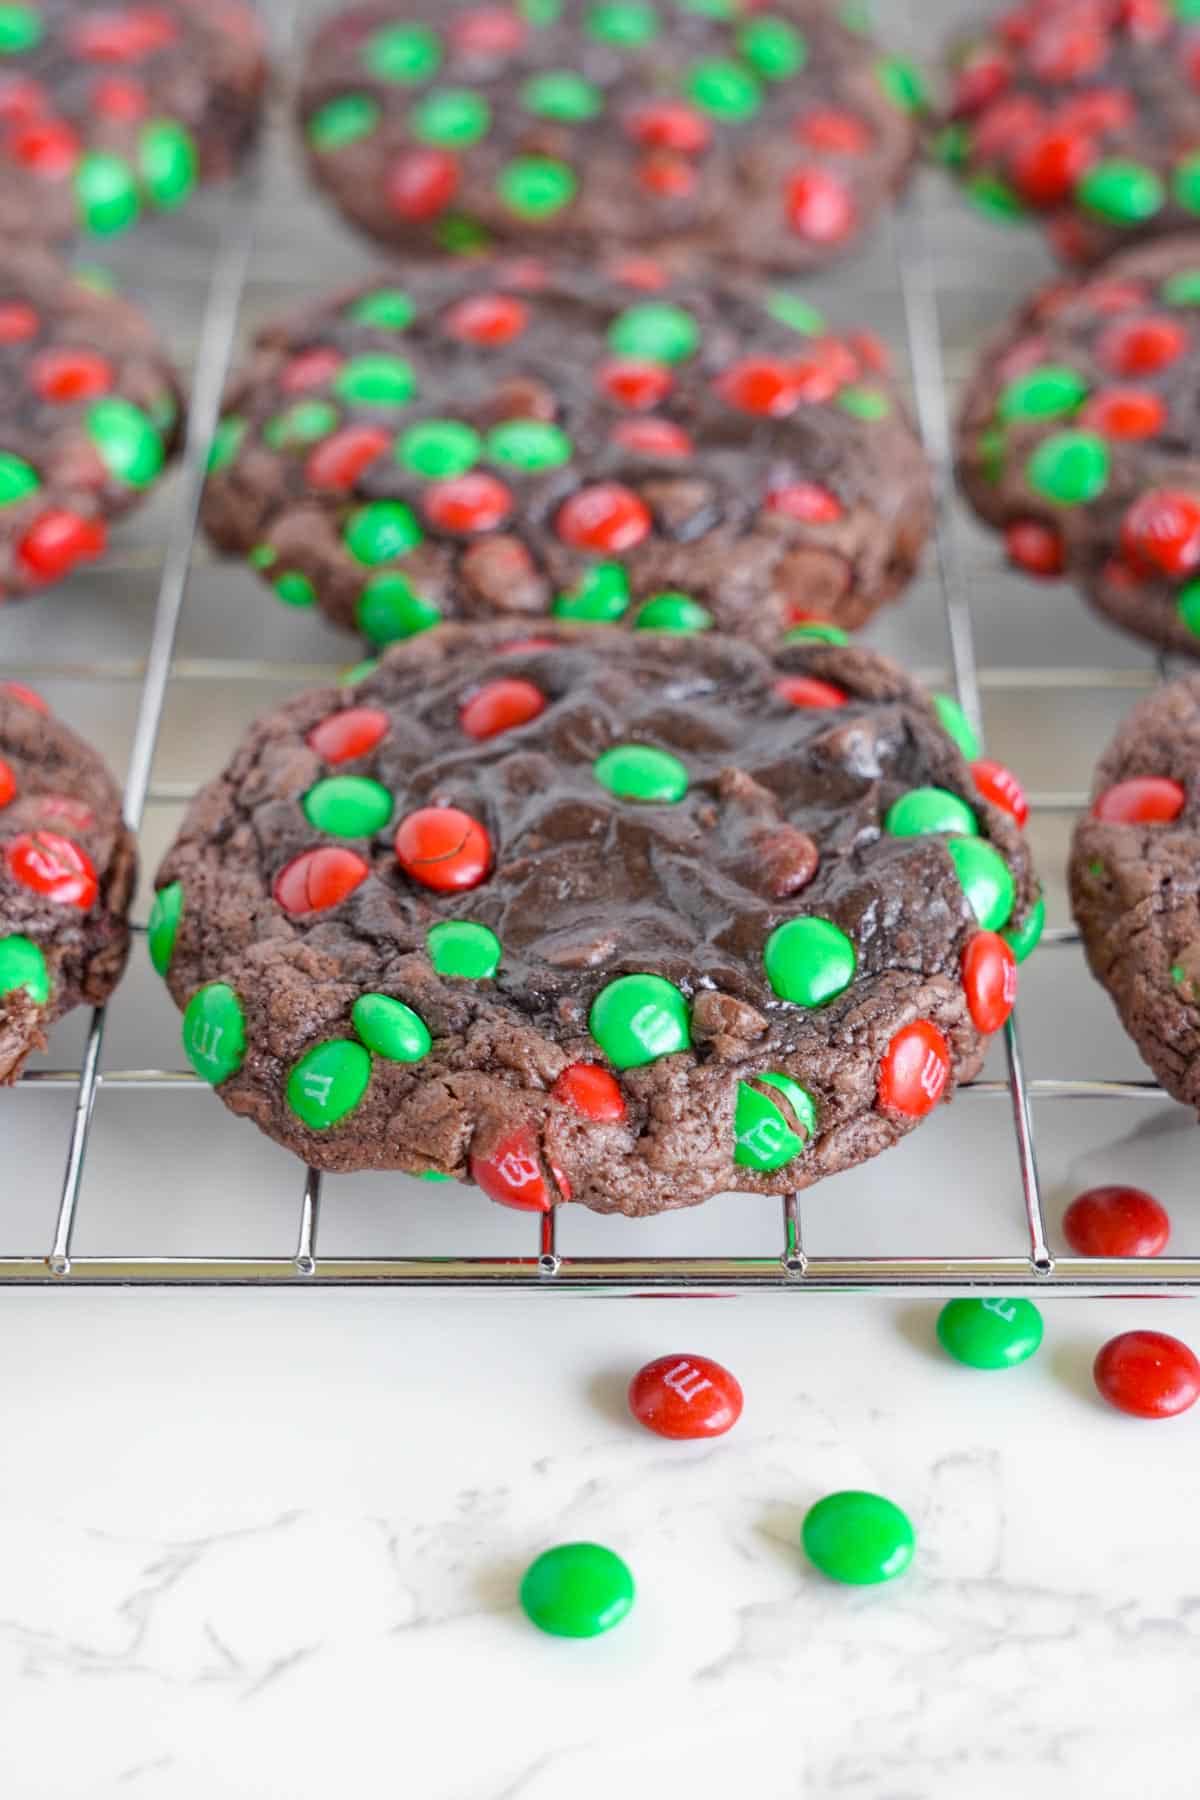 Chocolate cookies with green and red sprinkles on a cooling rack.